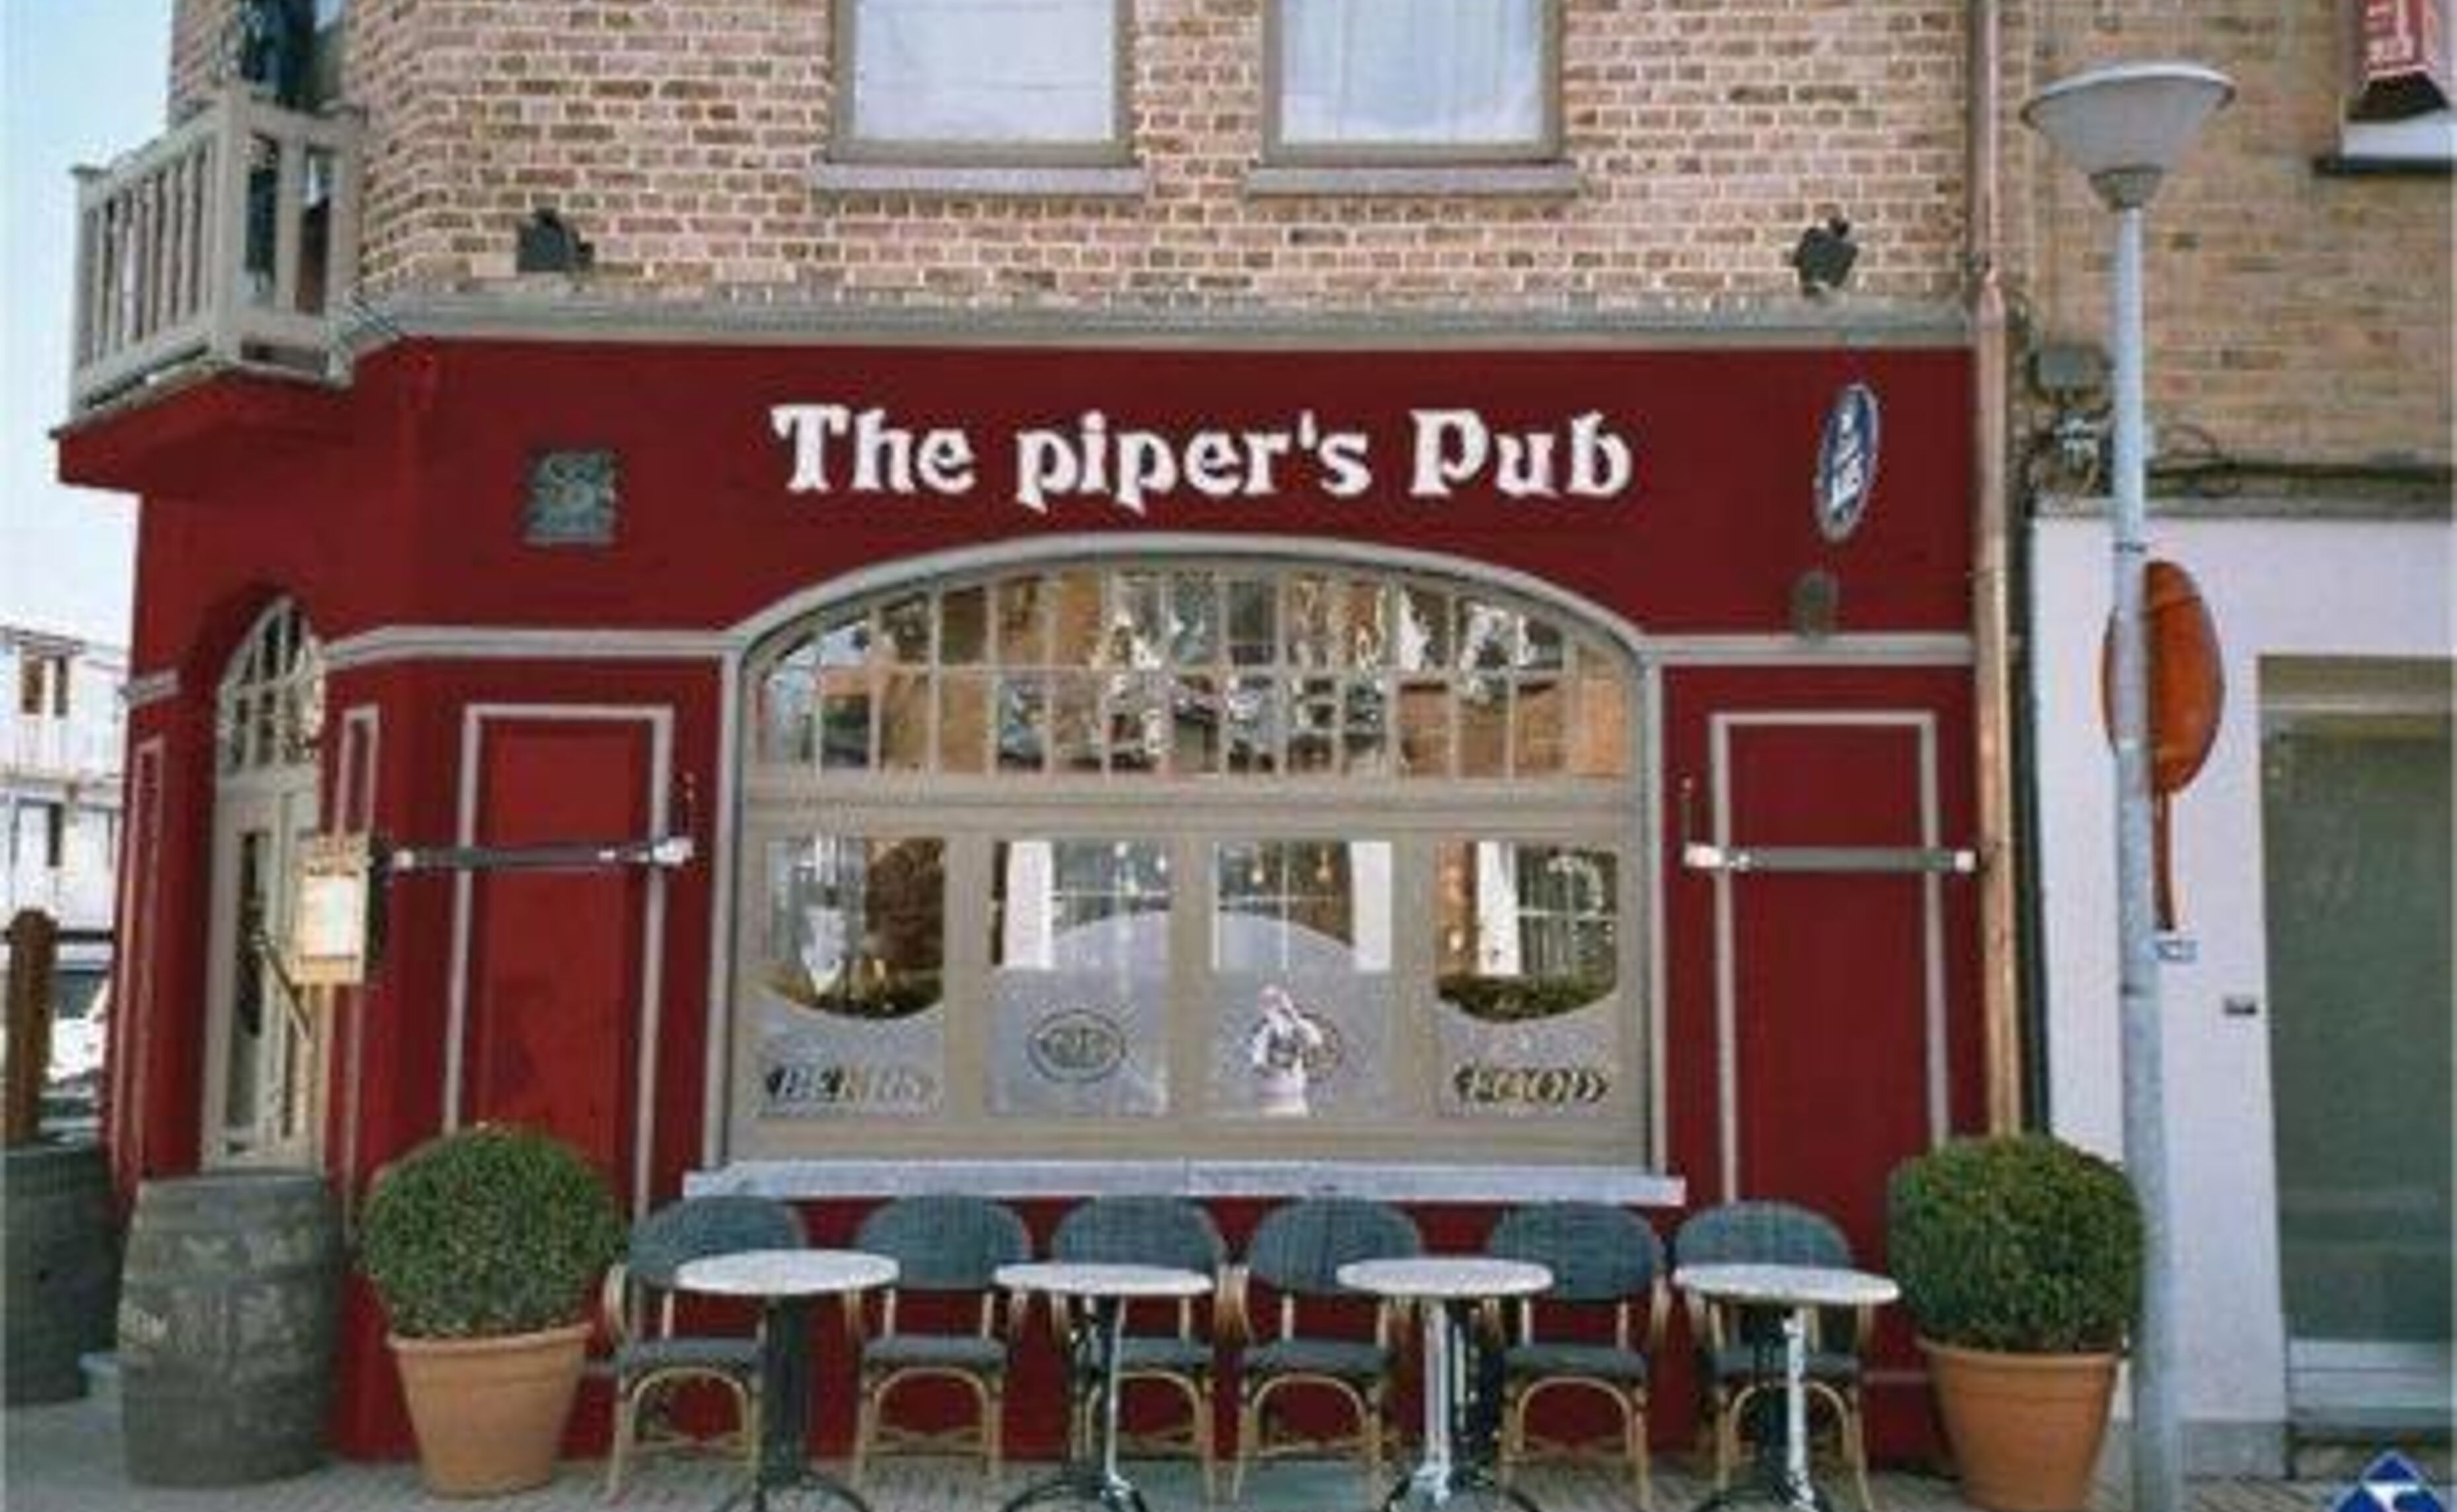 The Pipers pub